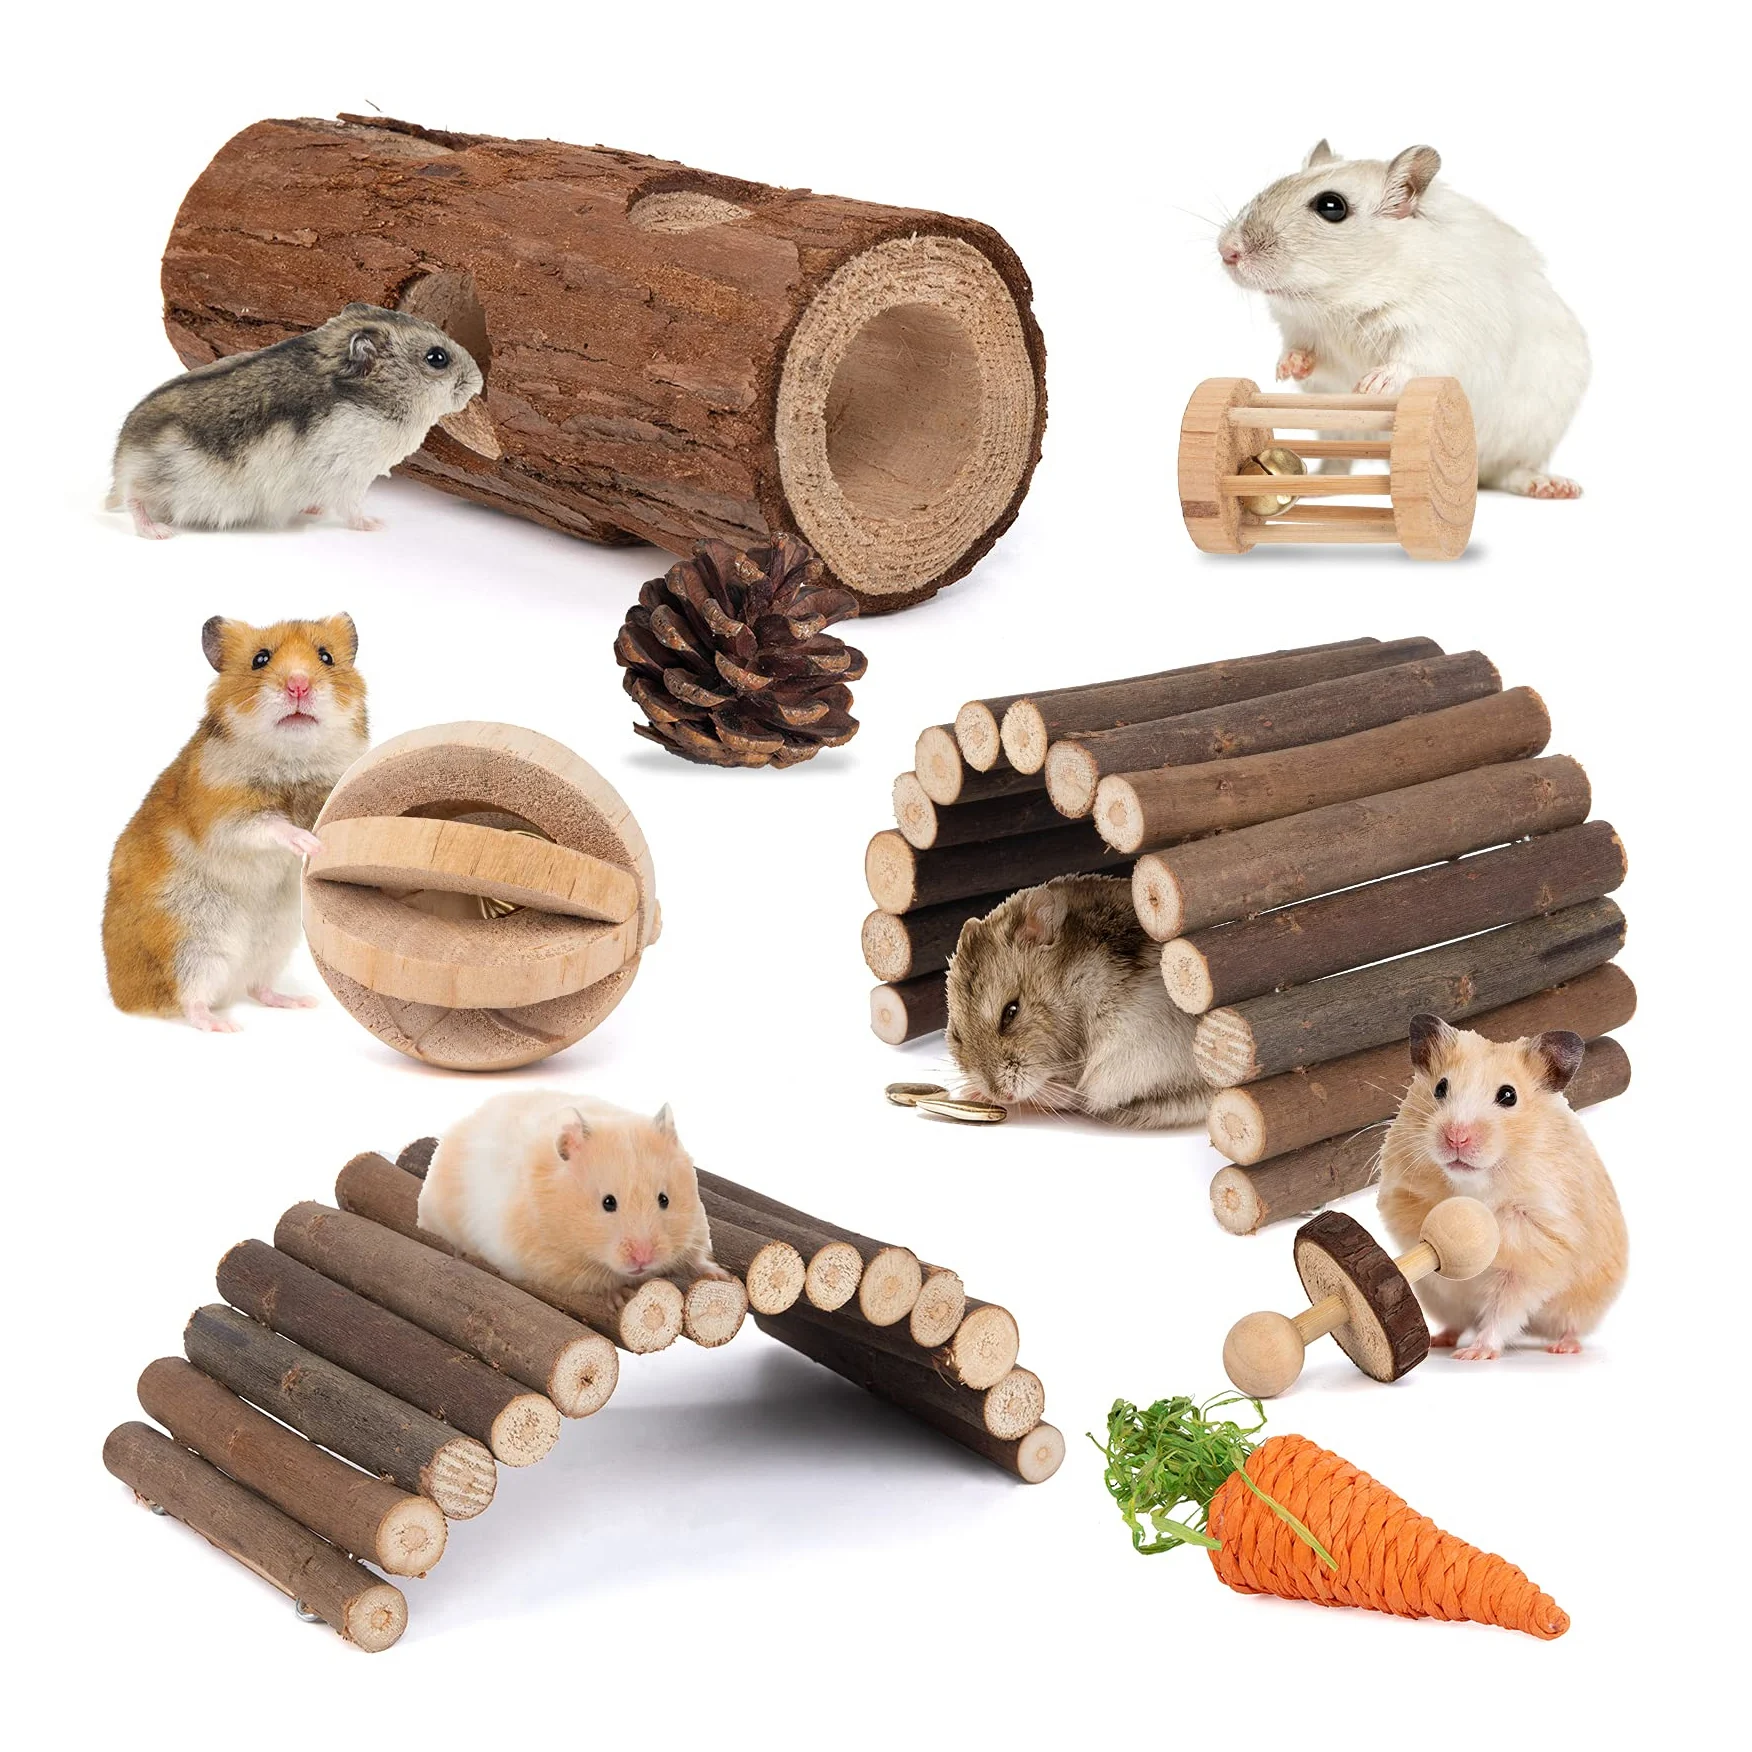 kathson Hamster Wooden House Syrian Hamster Hideout Hut with Ladder Bridge Small Pet Chew Toy for Dwarf Hamster Mouse Rat Gerbil and Other Small Animals 